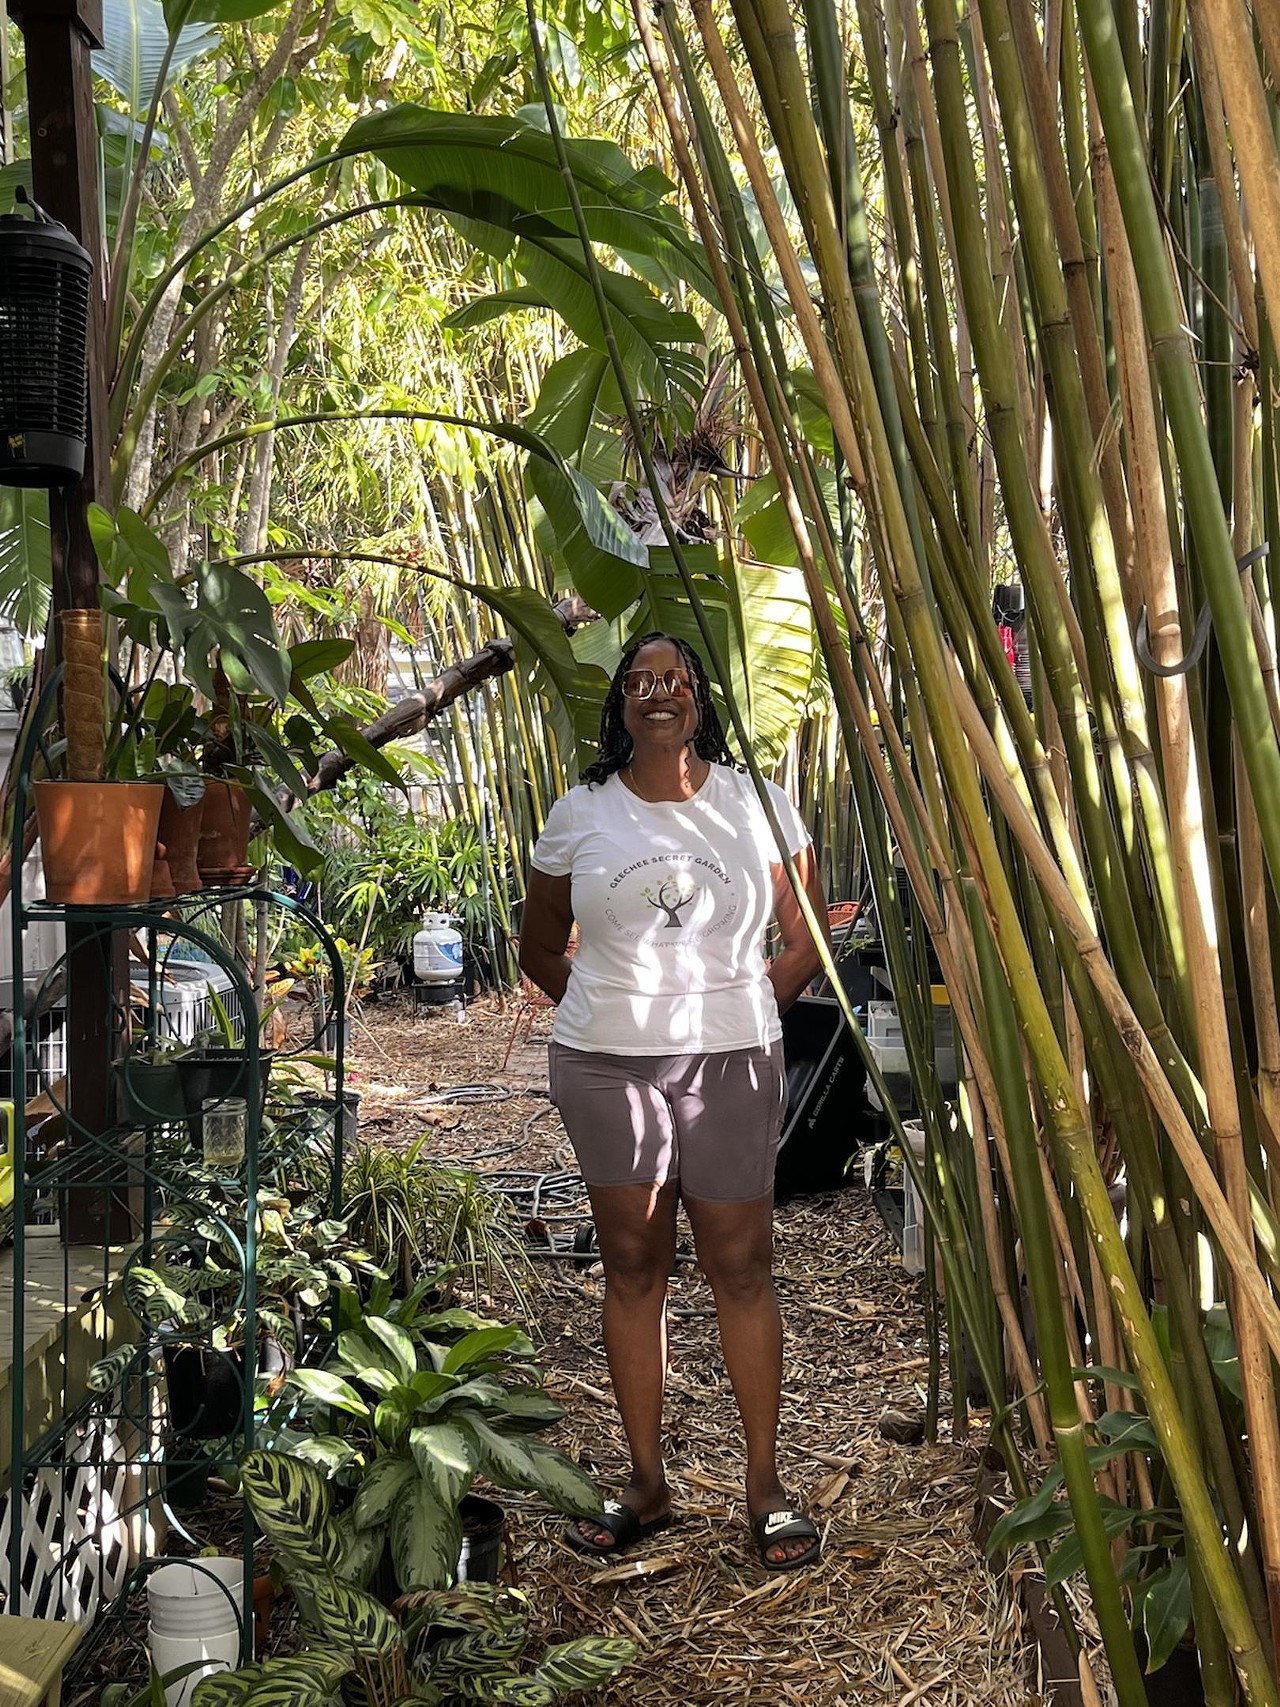 Senoia Brantley has created 'Geechee Secret Garden' next to her West Tampa home and it feels like it’s been there forever.